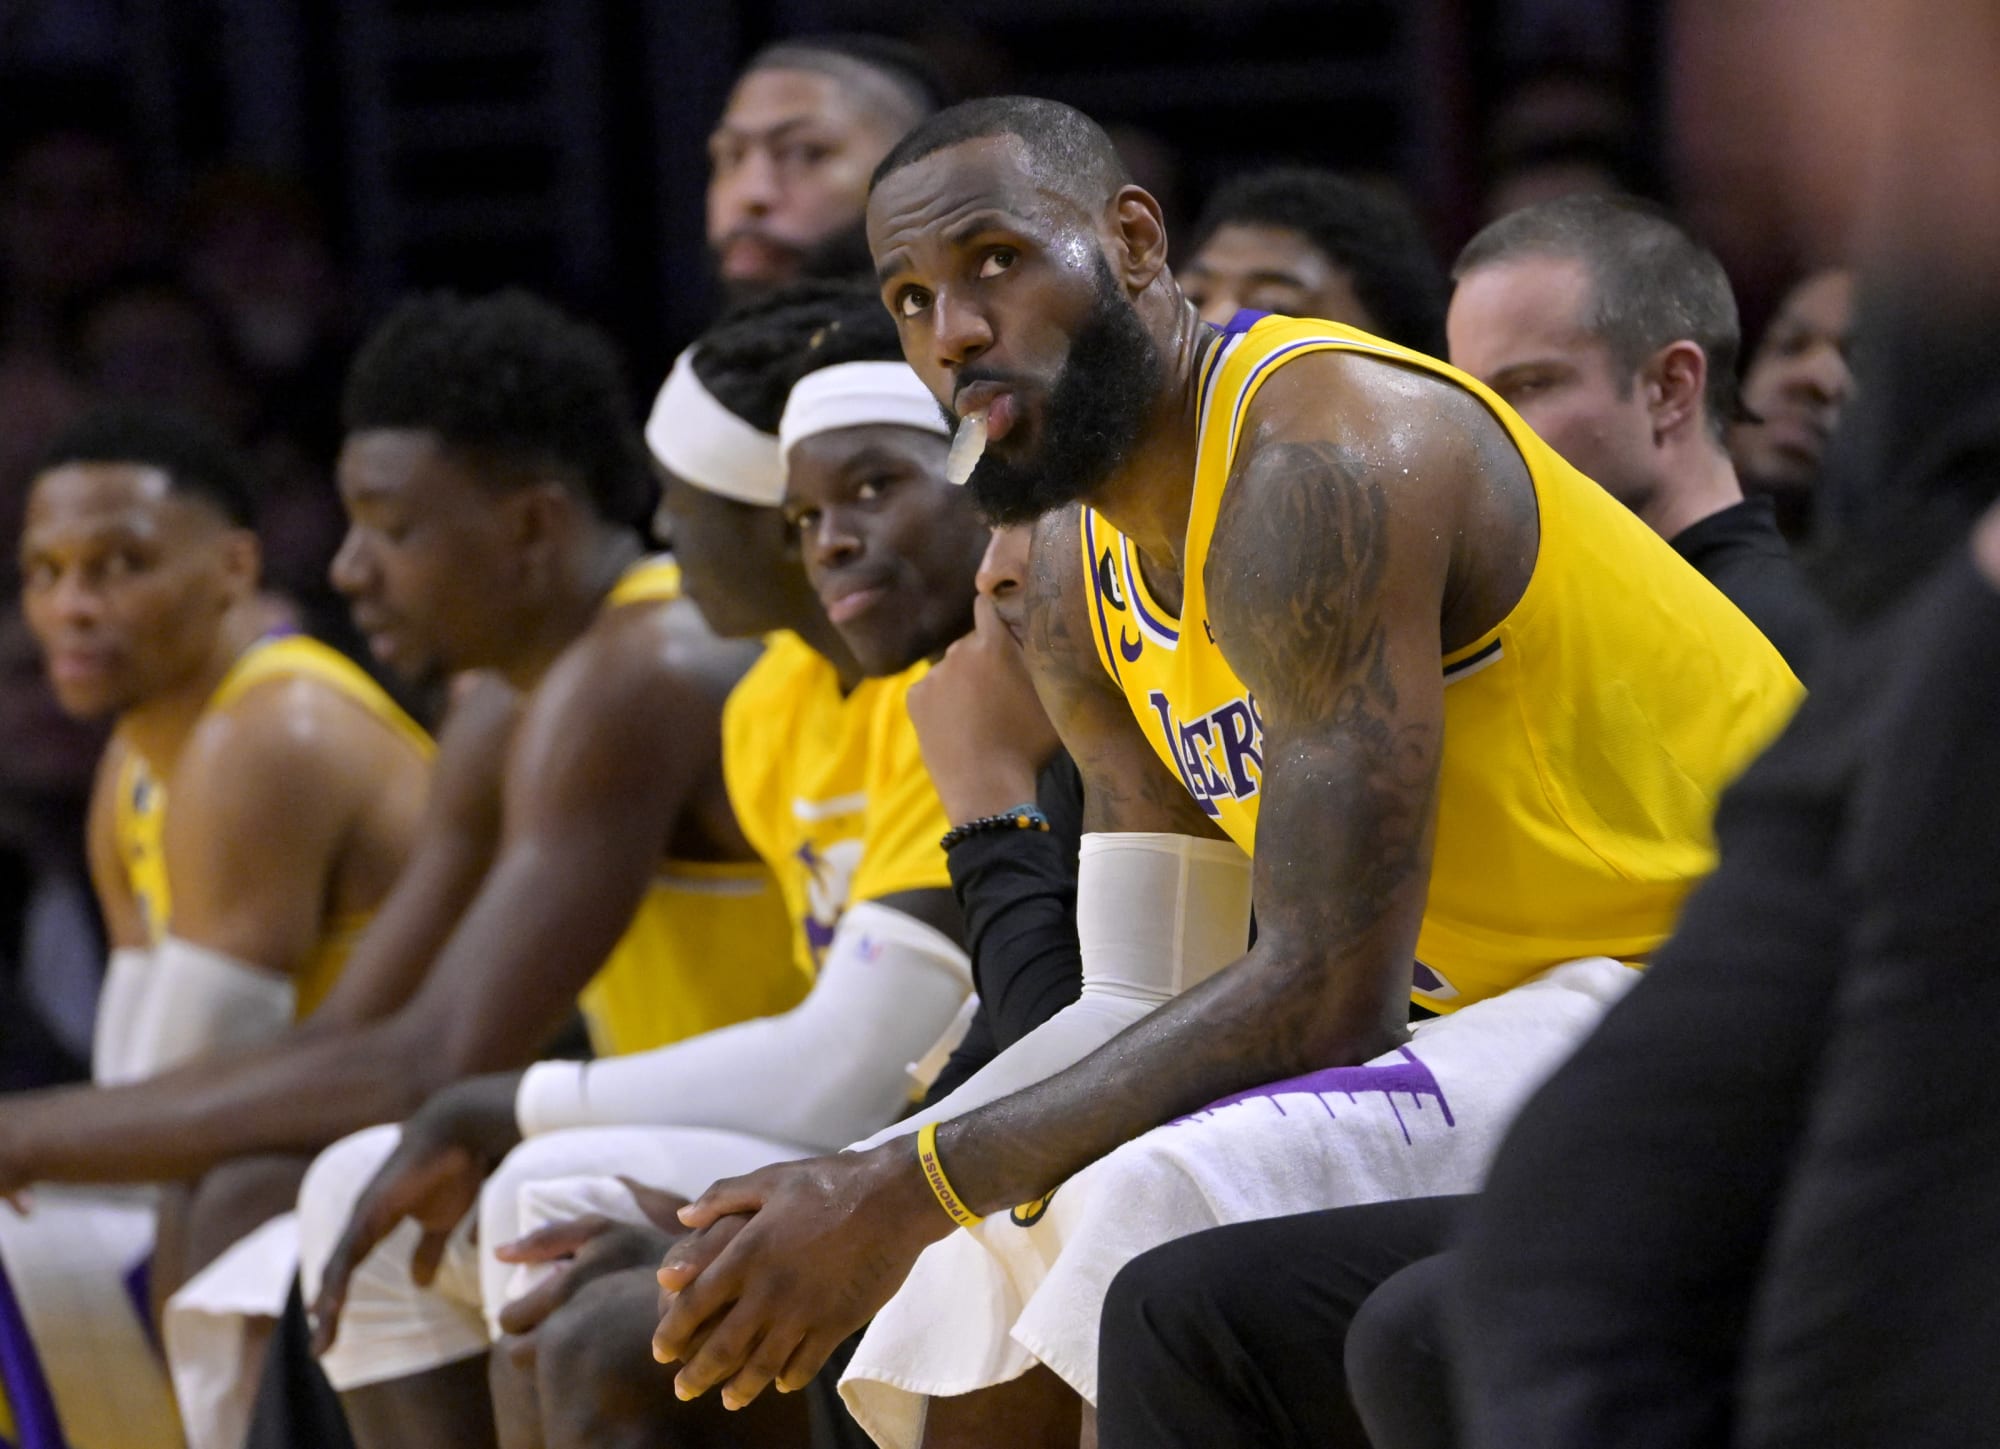 LeBron James sets unbelievable scoring record in loss to the Clippers